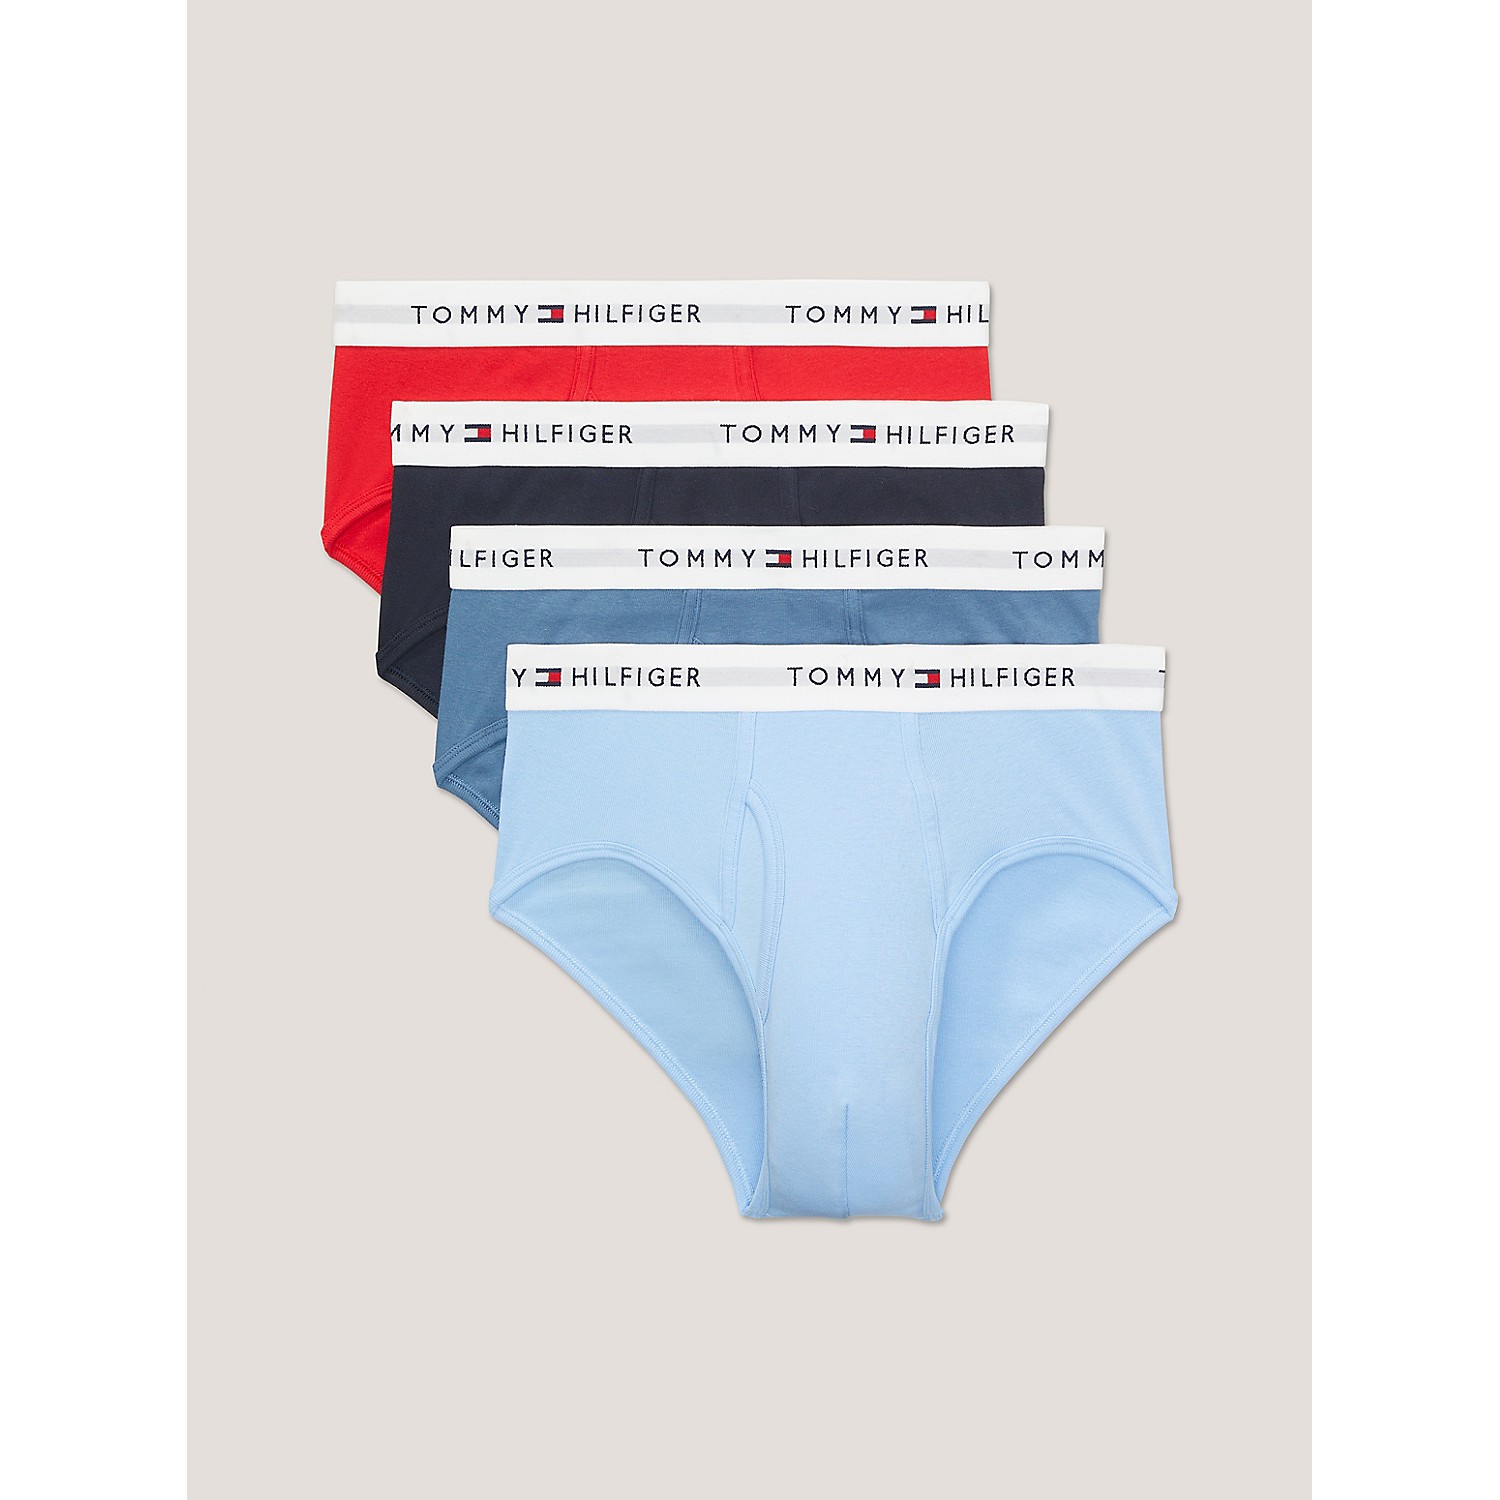 TOMMY HILFIGER Cotton Classics Brief 4-Pack